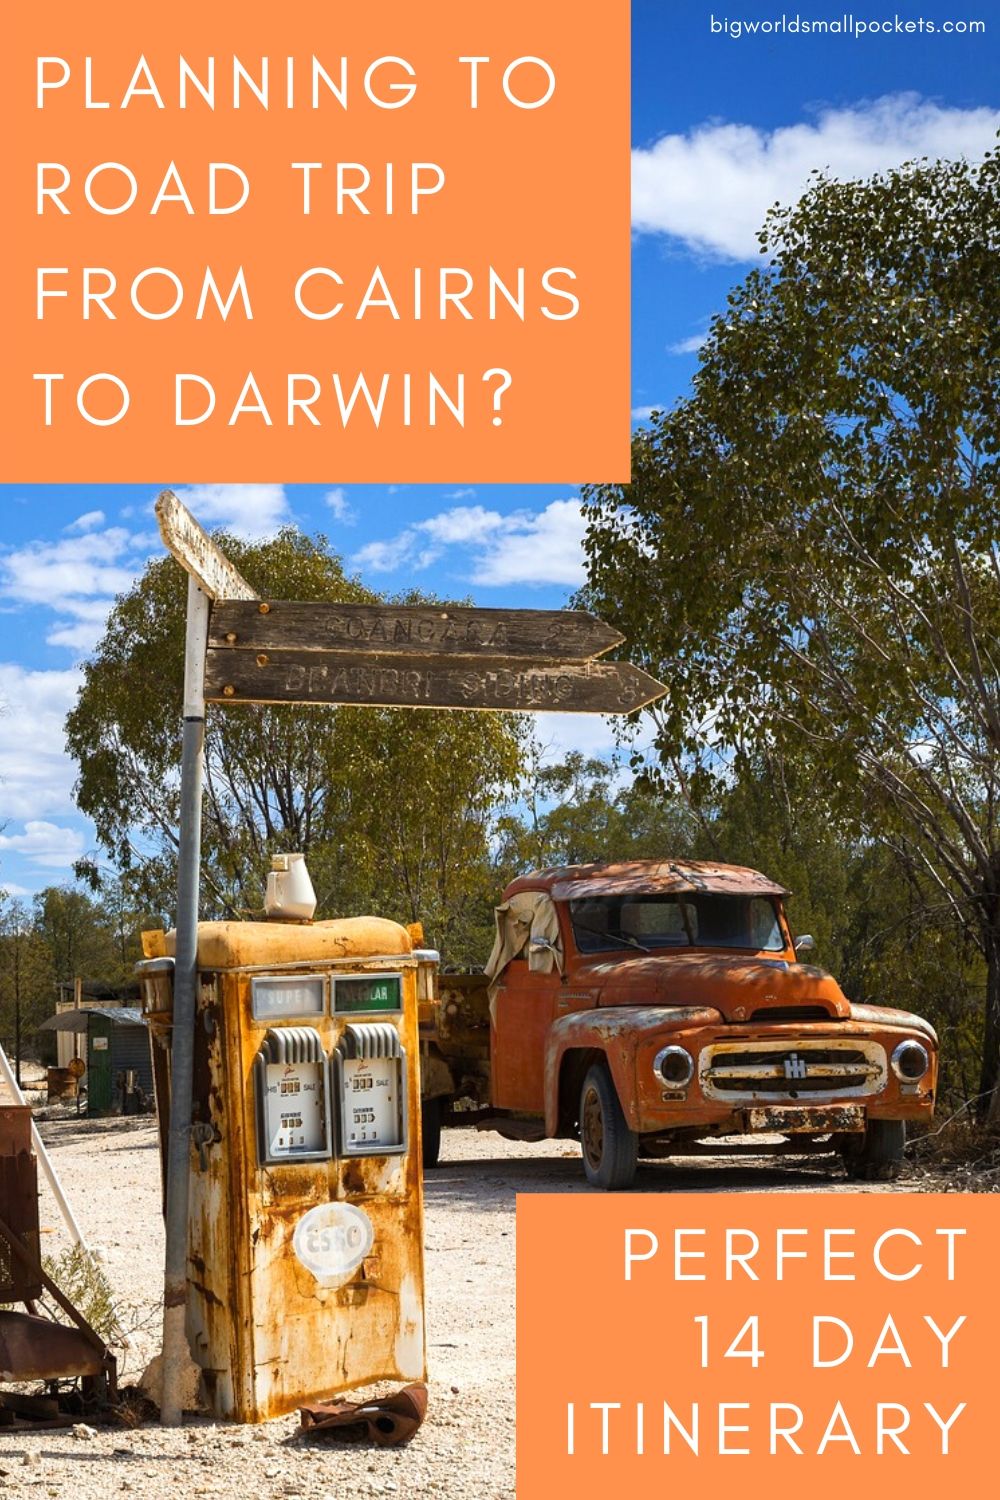 Cairns to Darwin - Your Perfect 14 Day Road Trip Itinerary!